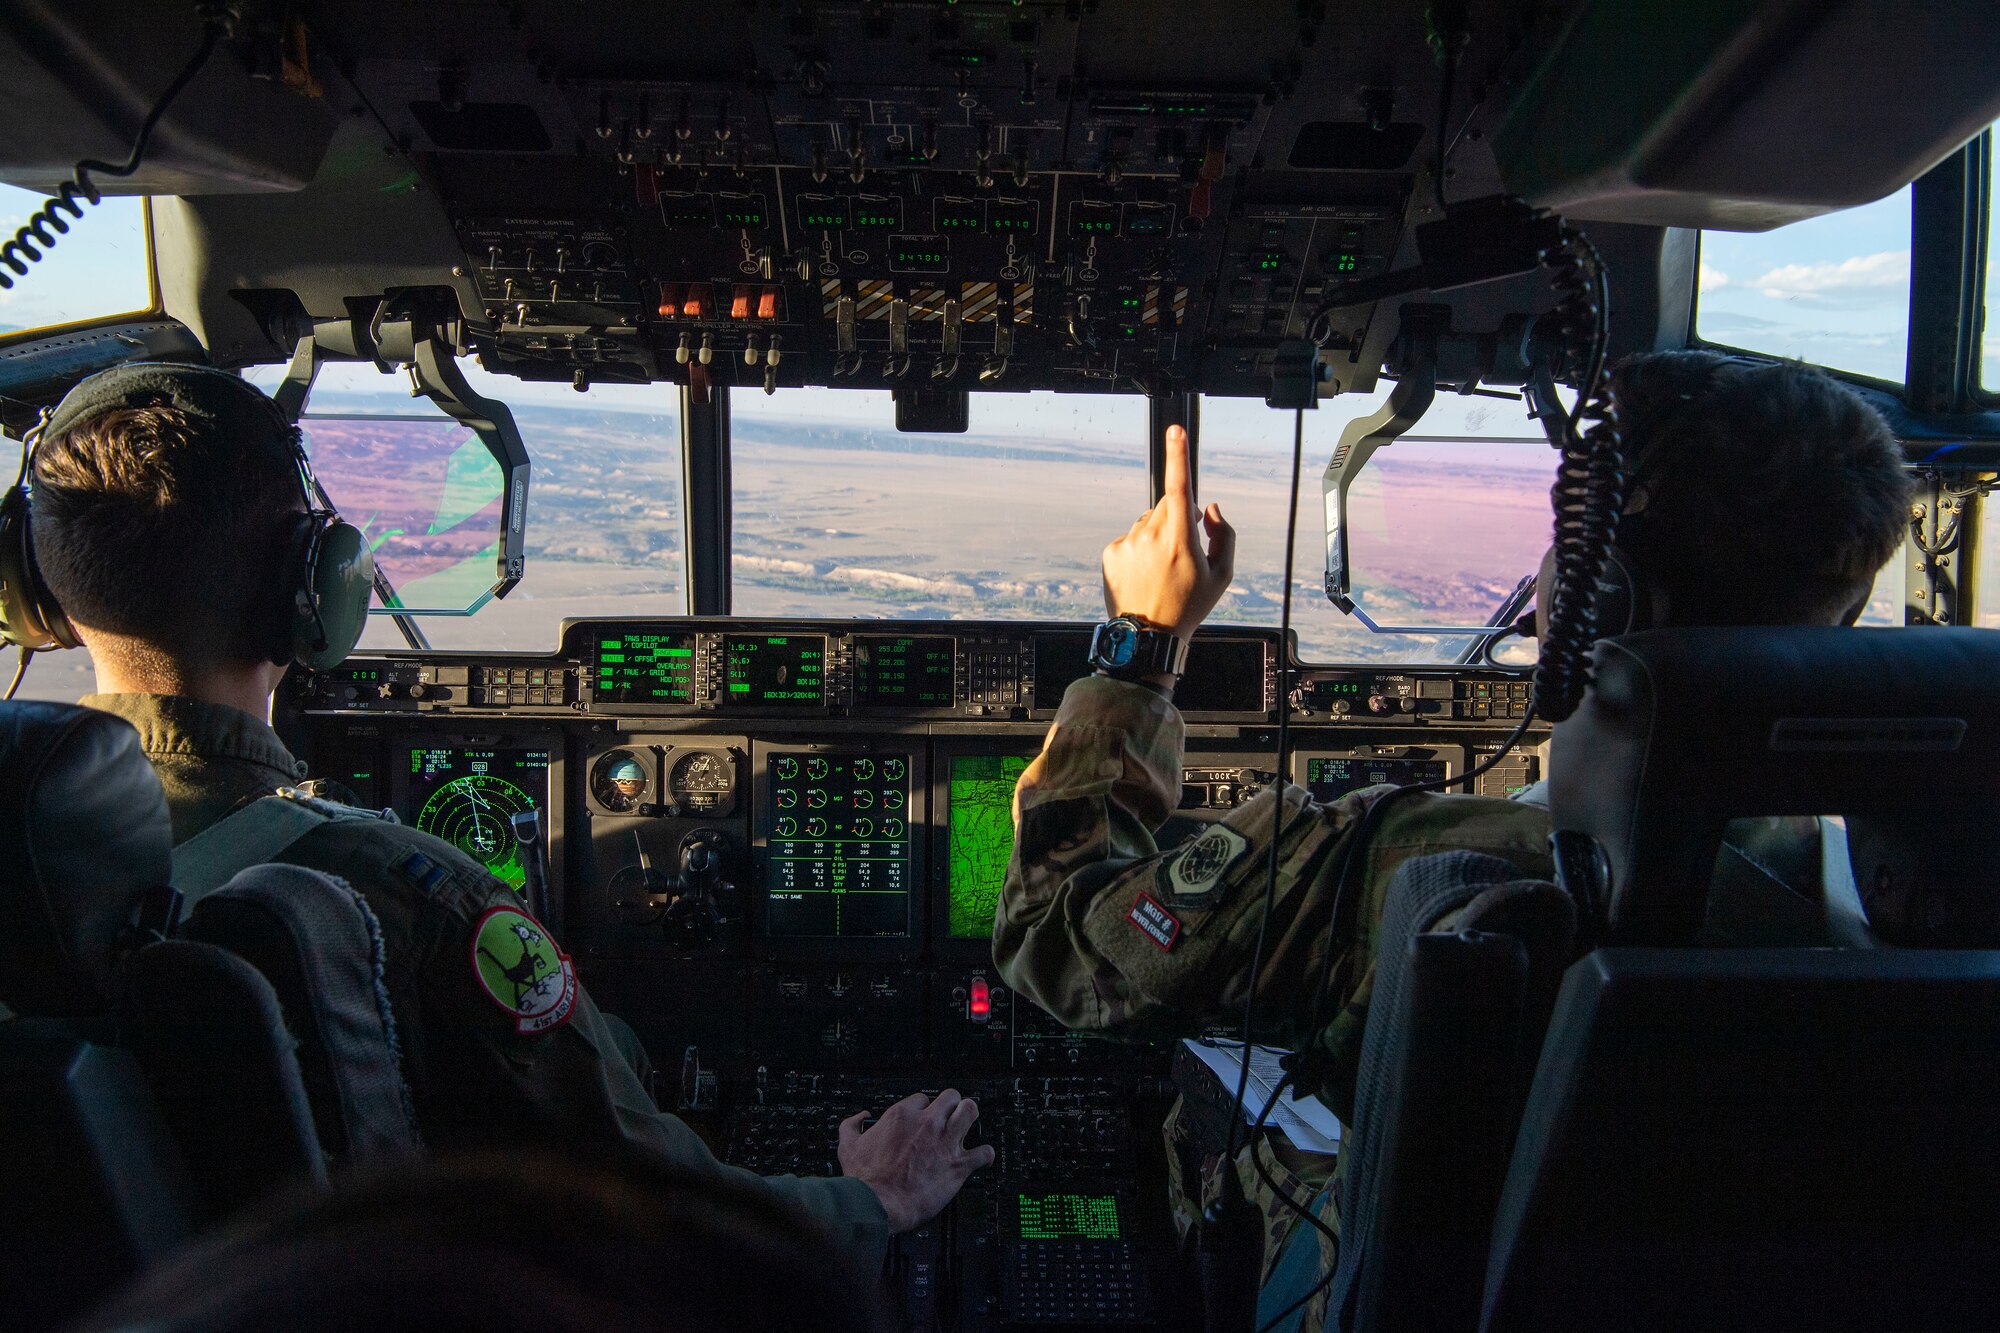 Pilots from the 41st Airlift Squadron fly a C-130J Super Hercules during pre-deployment training in Colorado, July 30, 2020. Throughout the training, the 41st AS was able to perform airdrops, offload cargo, fly low-levels, land on dirt runways, integrate with other wings, operate in low-light environments and navigate topography that the squadron is unable to replicate at home station. (U.S. Air Force photo by Airman 1st Class Aaron Irvin)